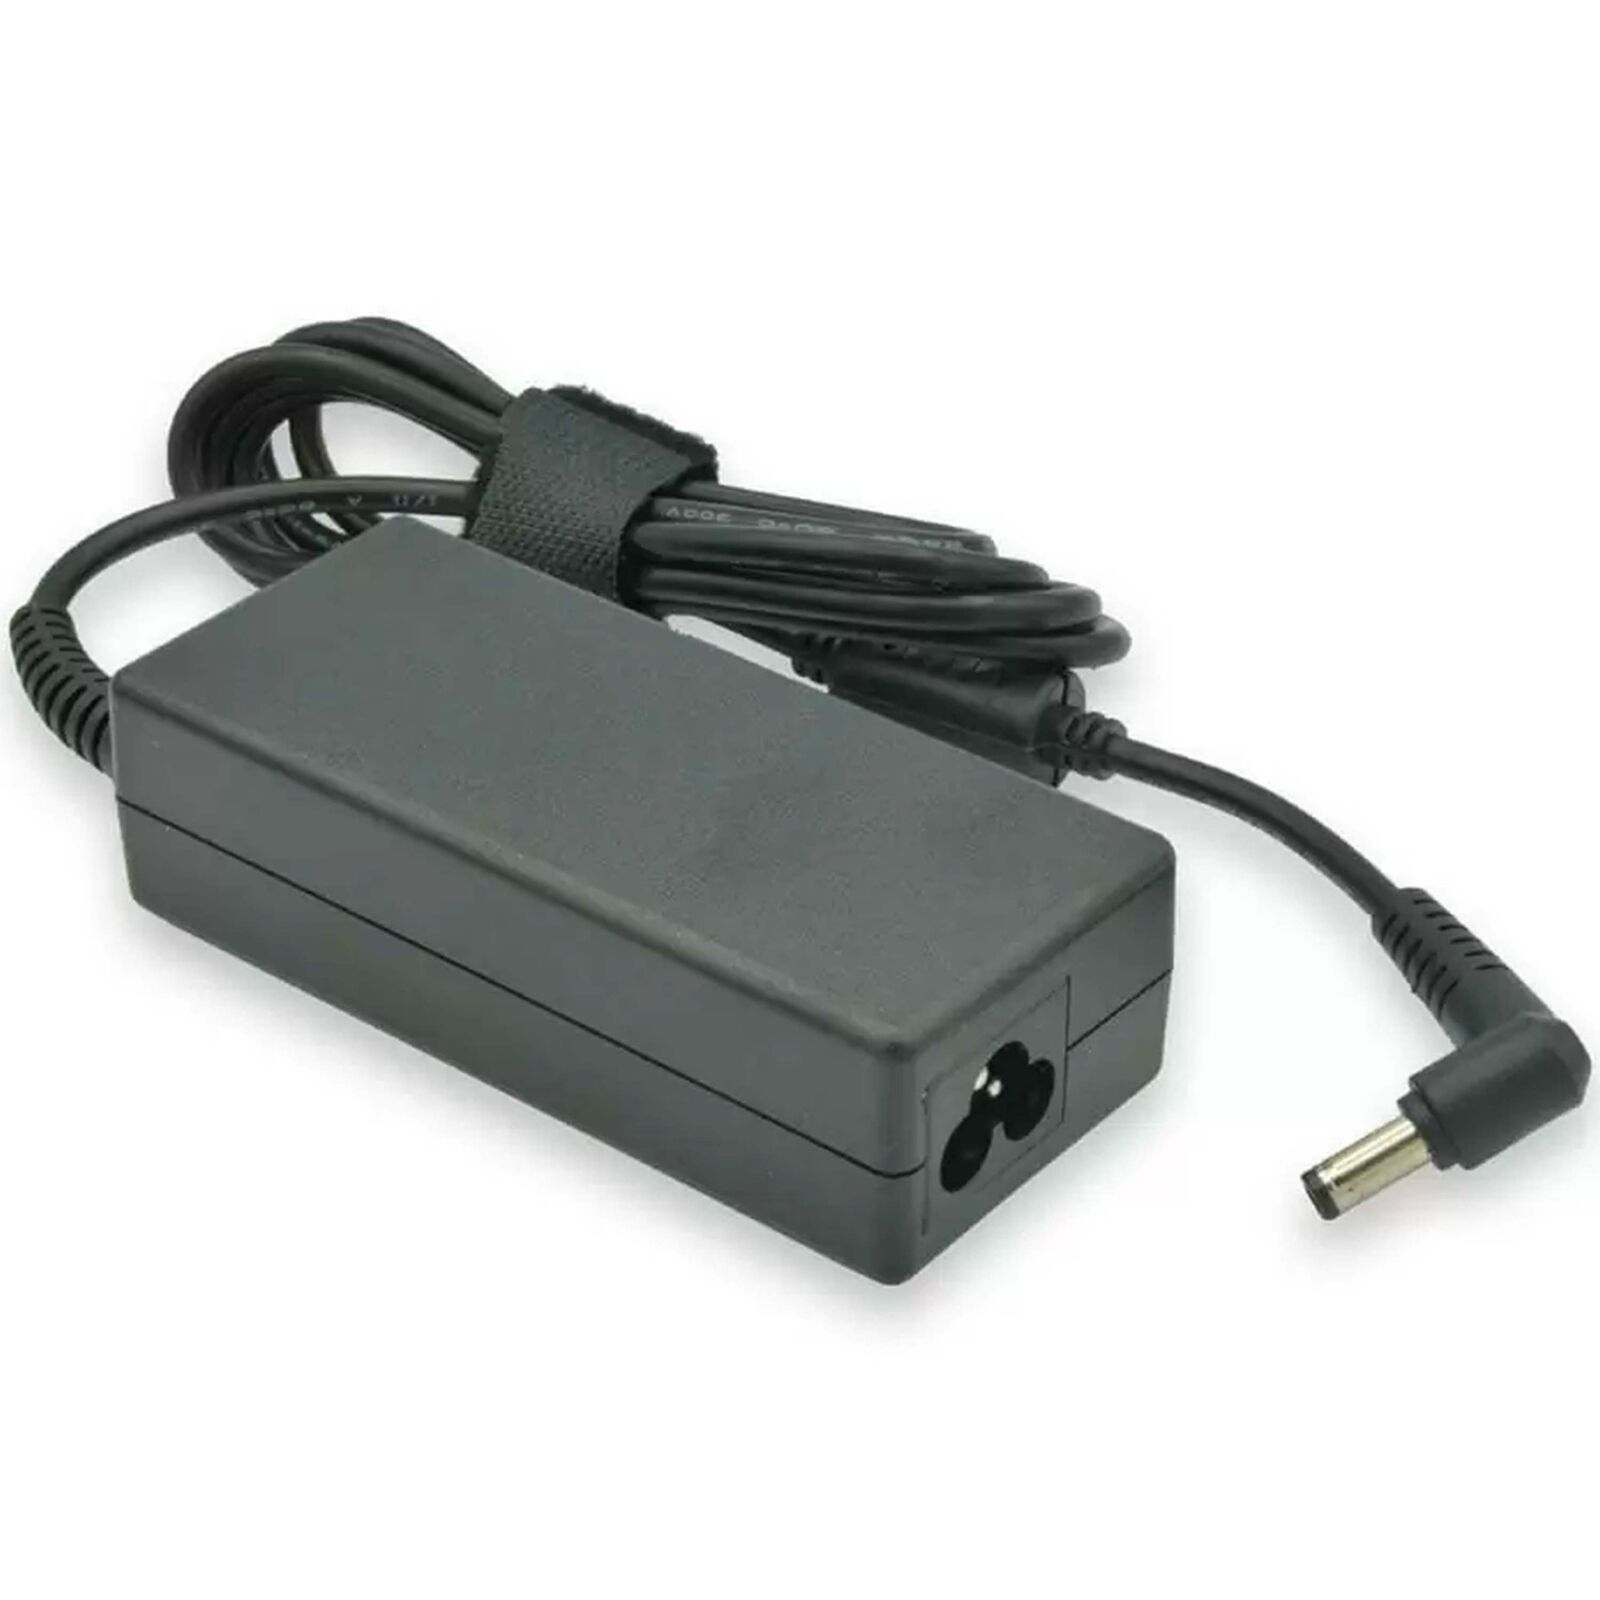 Charger Original Toshiba 65w 19v 3.42a Pa3714u-1aca 0 7/32in X 0 3/32in Asus _